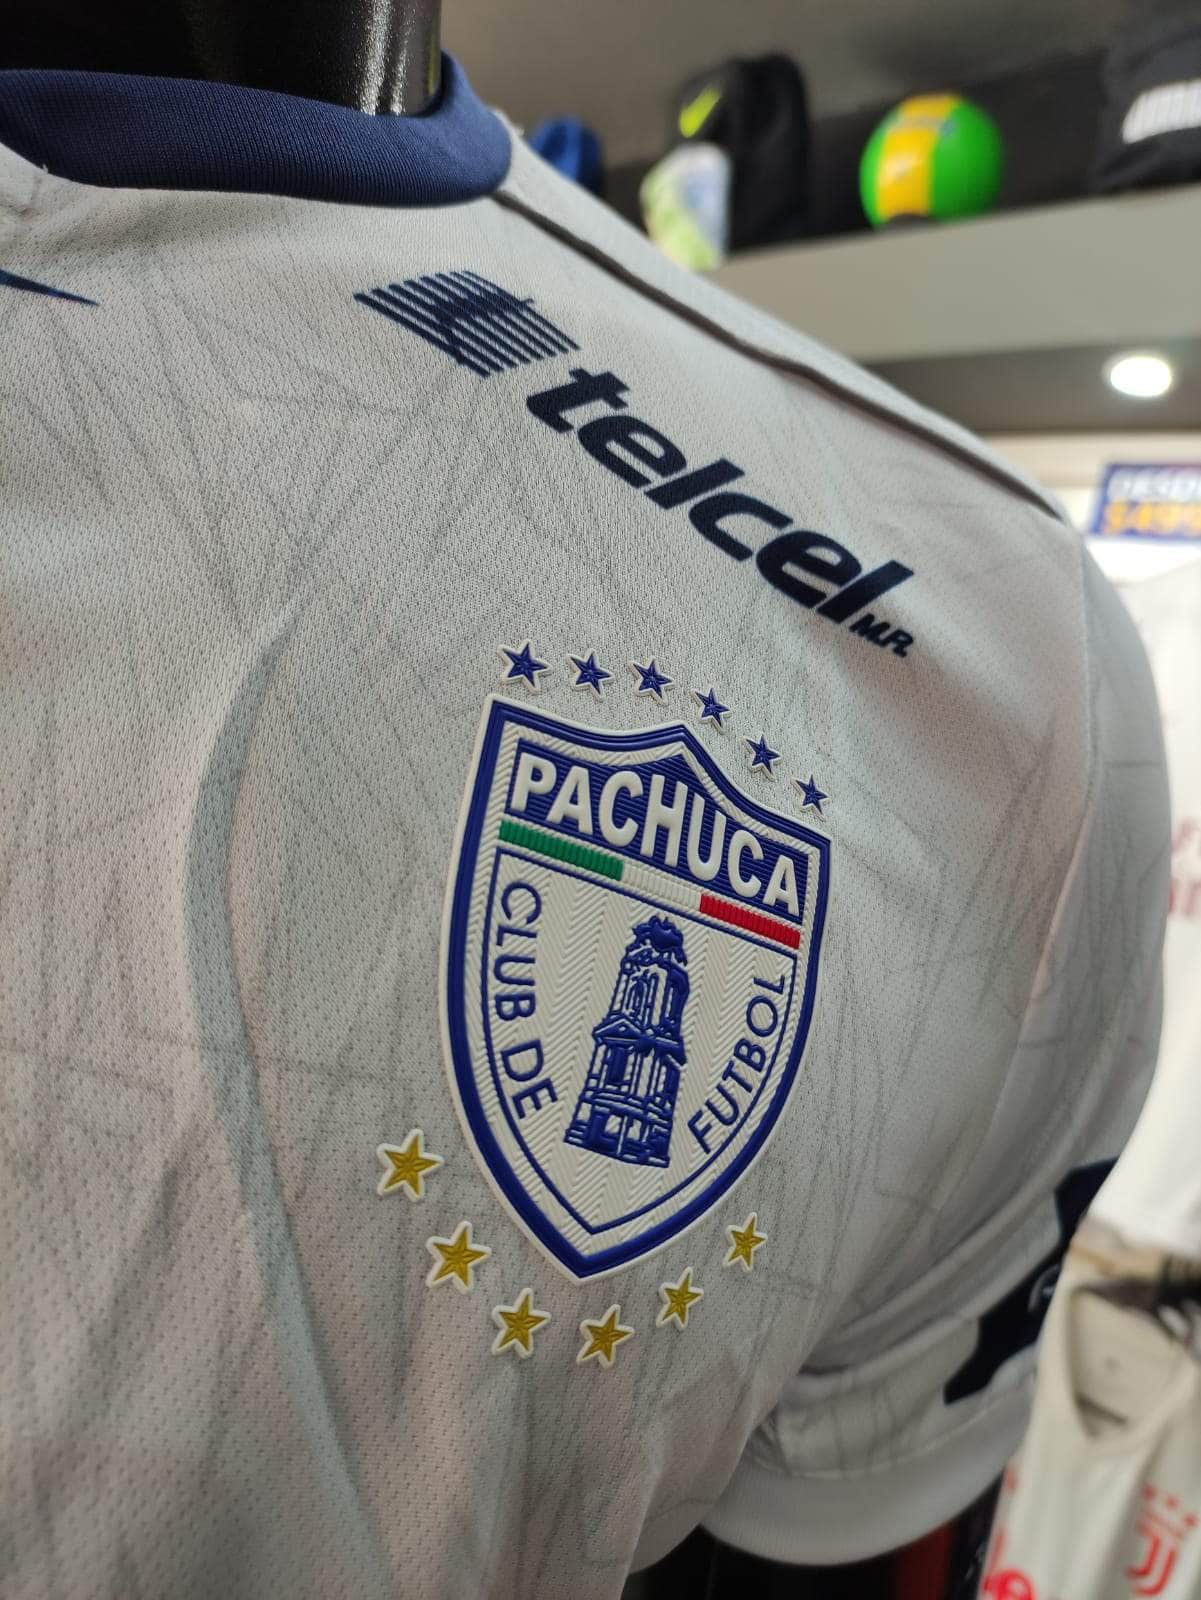 Charly JERSEY Jersey Charly Pachuca 2019-2020 Local